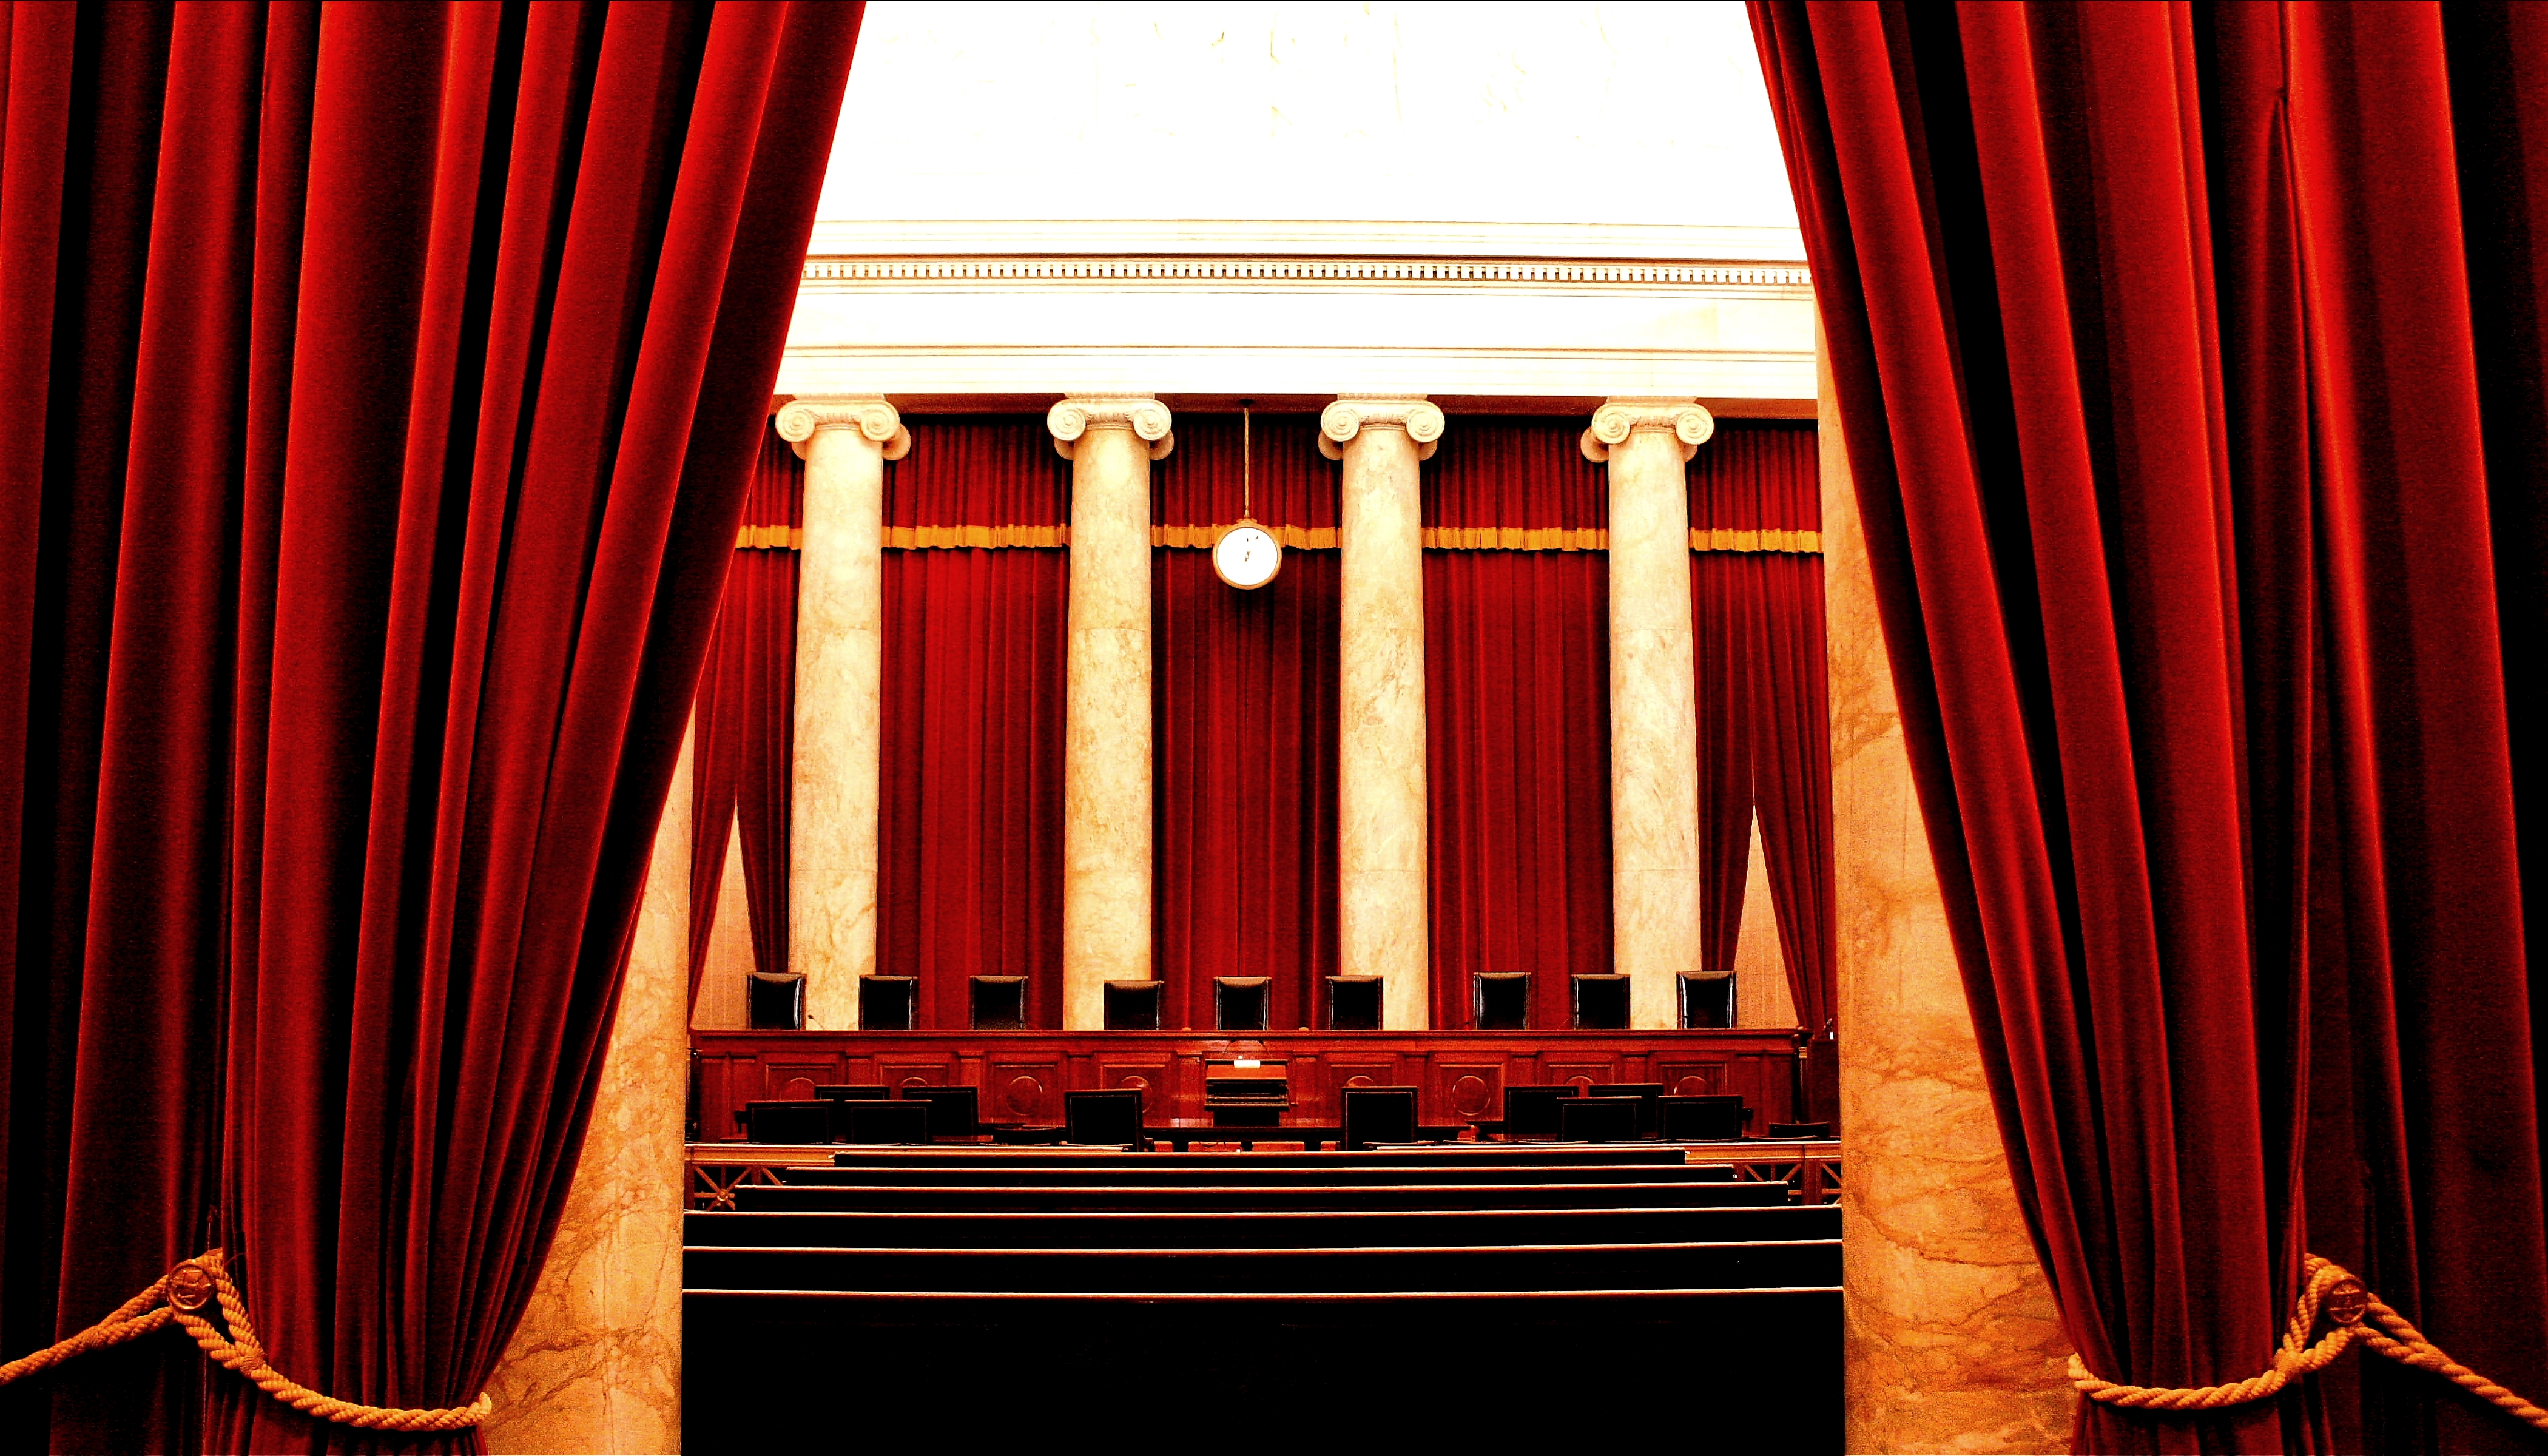  The interior of the United States Supreme Court.